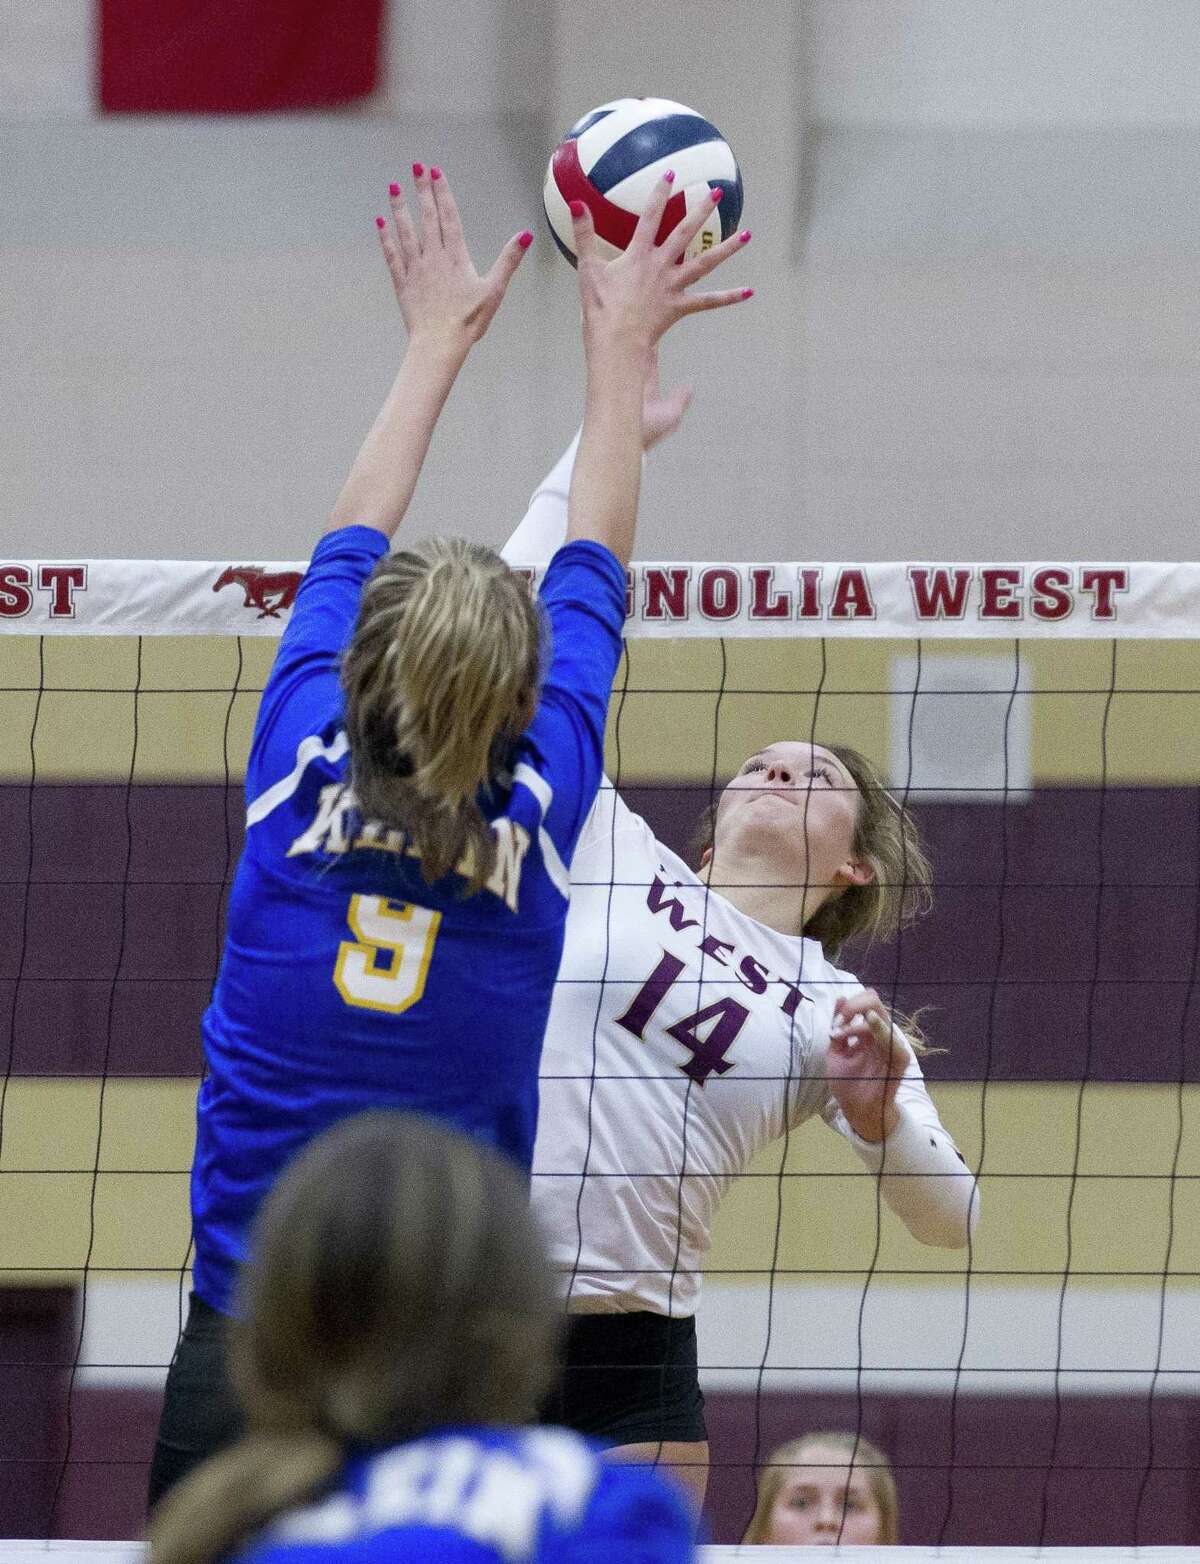 Magnolia West's Kyndall Eddlemon (14) goes up against Klein's Kierstyn McFall (9) during the first set of a non-district volleyball match at Magnolia West High School on Wednesday, Aug. 15, 2018, in Magnolia